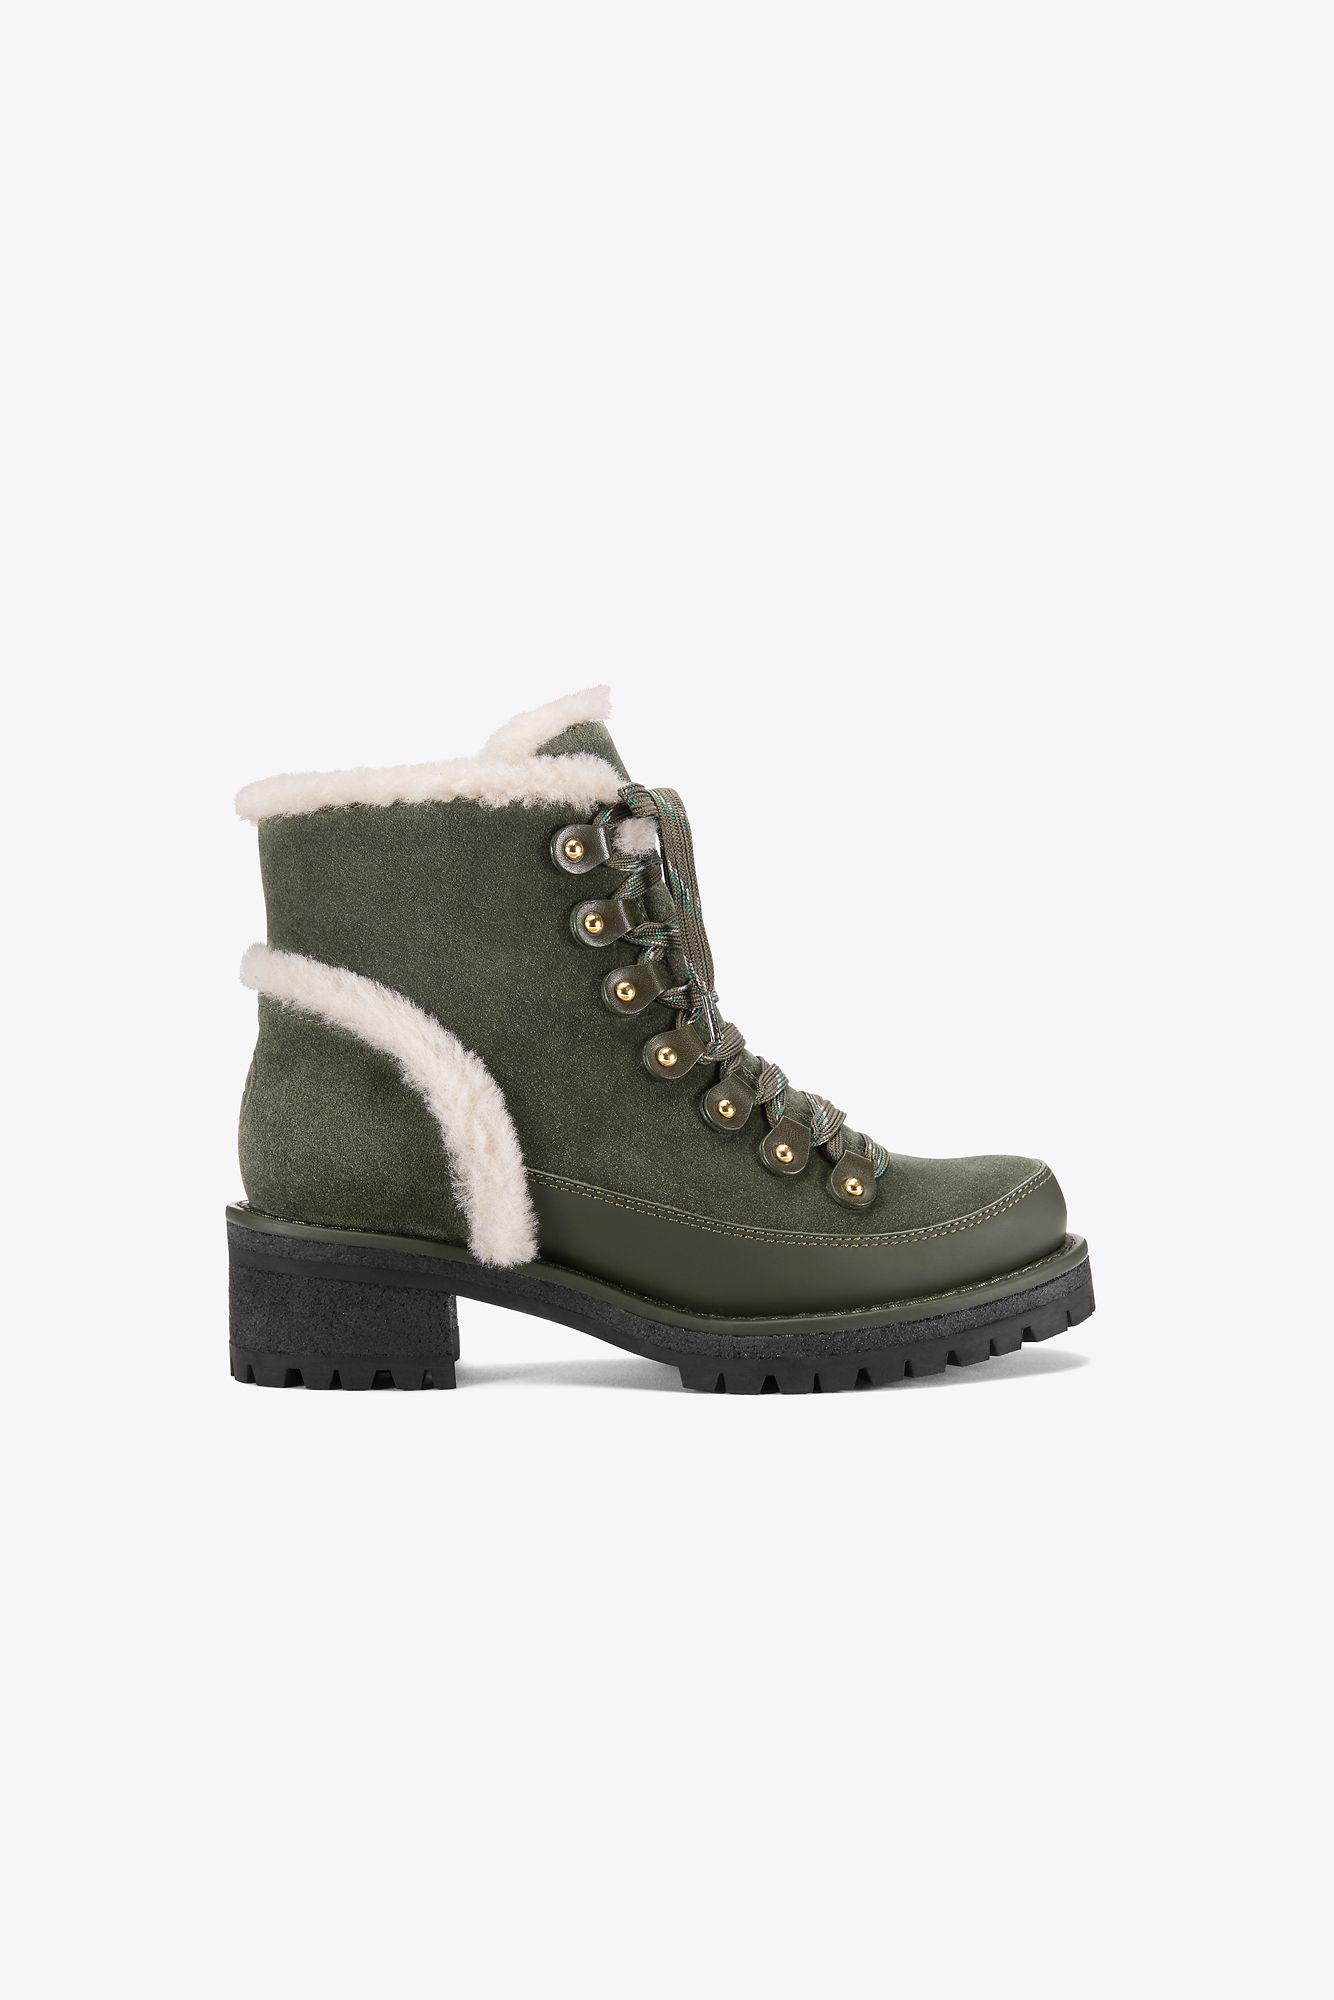 Tory Burch Suede Cooper Shearling Bootie in Green - Lyst